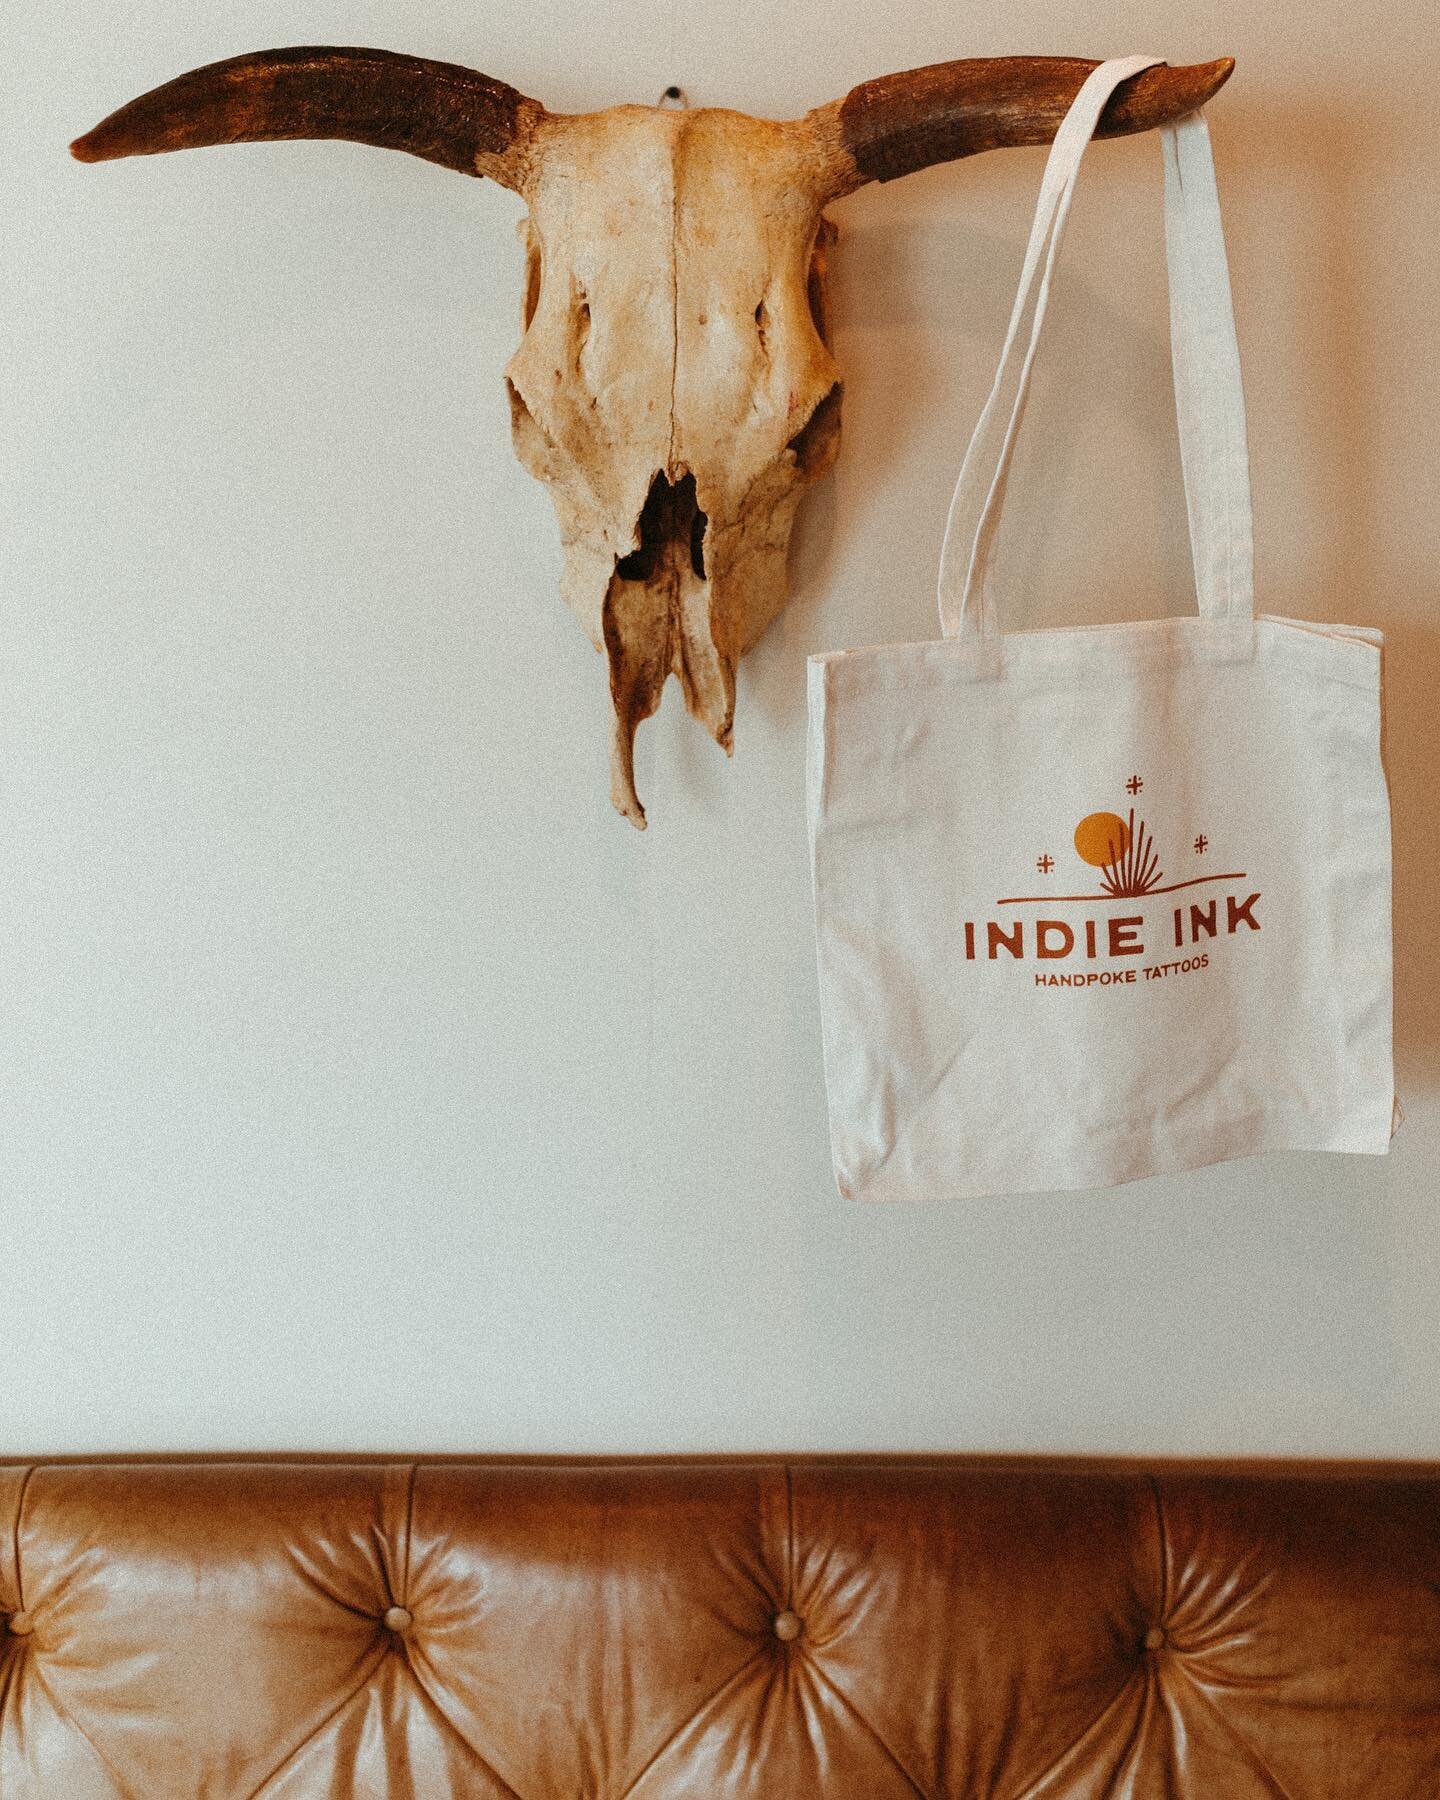 ⊹ INDIE INK TOTES ⊹ Available now at the shop! Limited quantities - grab one while you can.